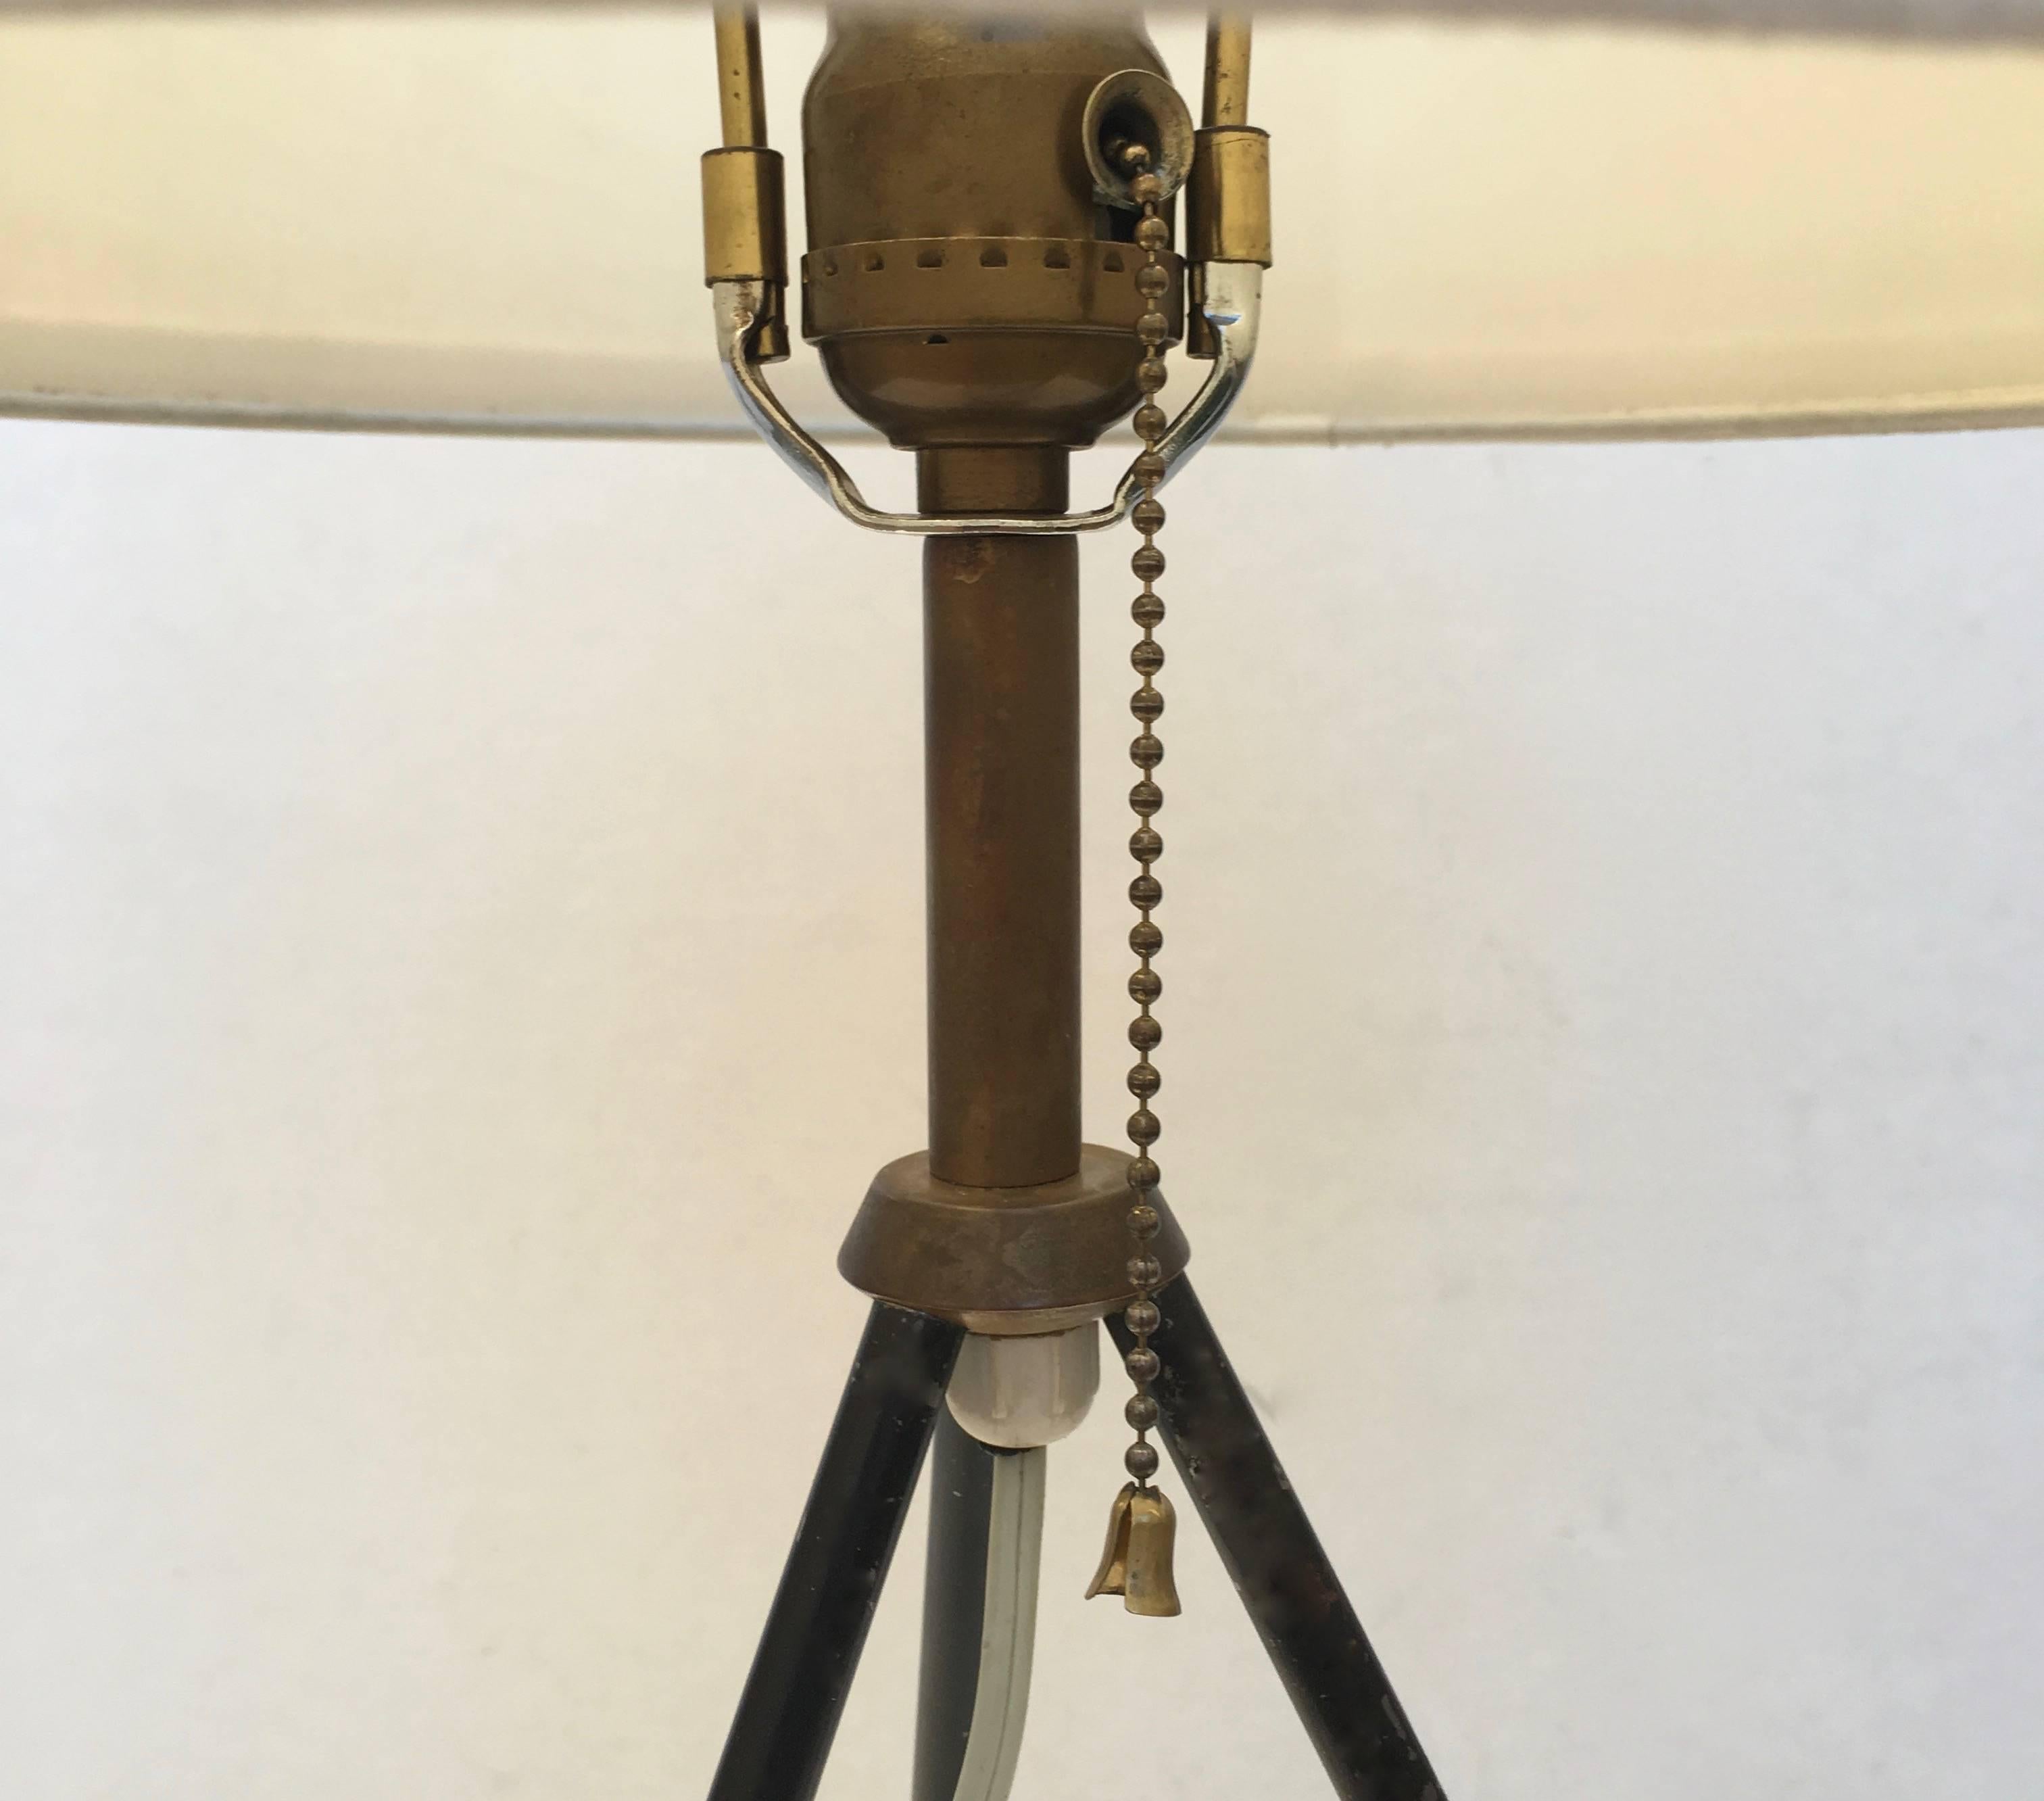 Midcentury Tripod Lamp
circa 1950s
Painted steel, brass
23 high with shade, 11 inches in diameter
Good condition, wear to paint